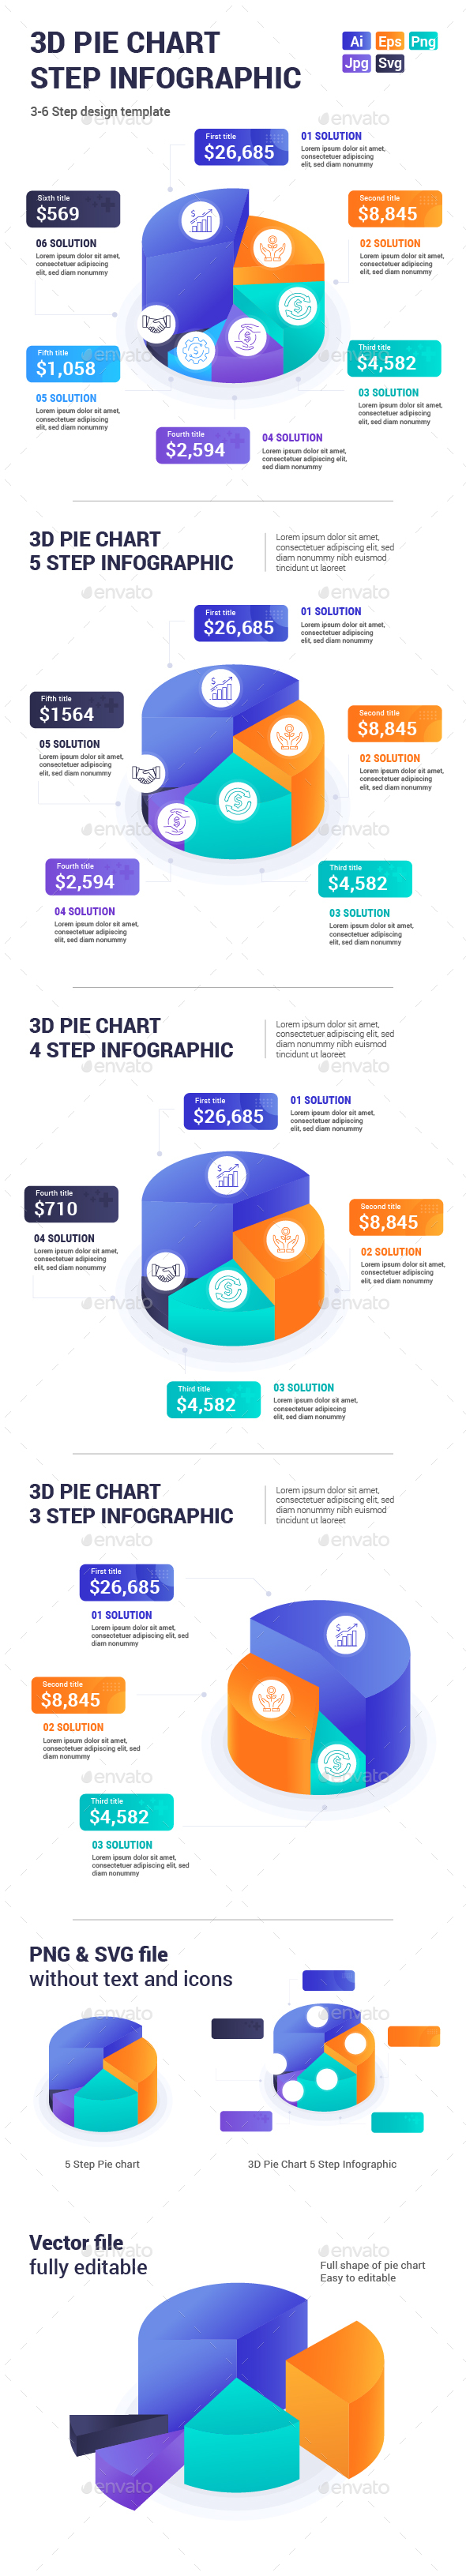 [DOWNLOAD]3D Pie Chart Step Infographic